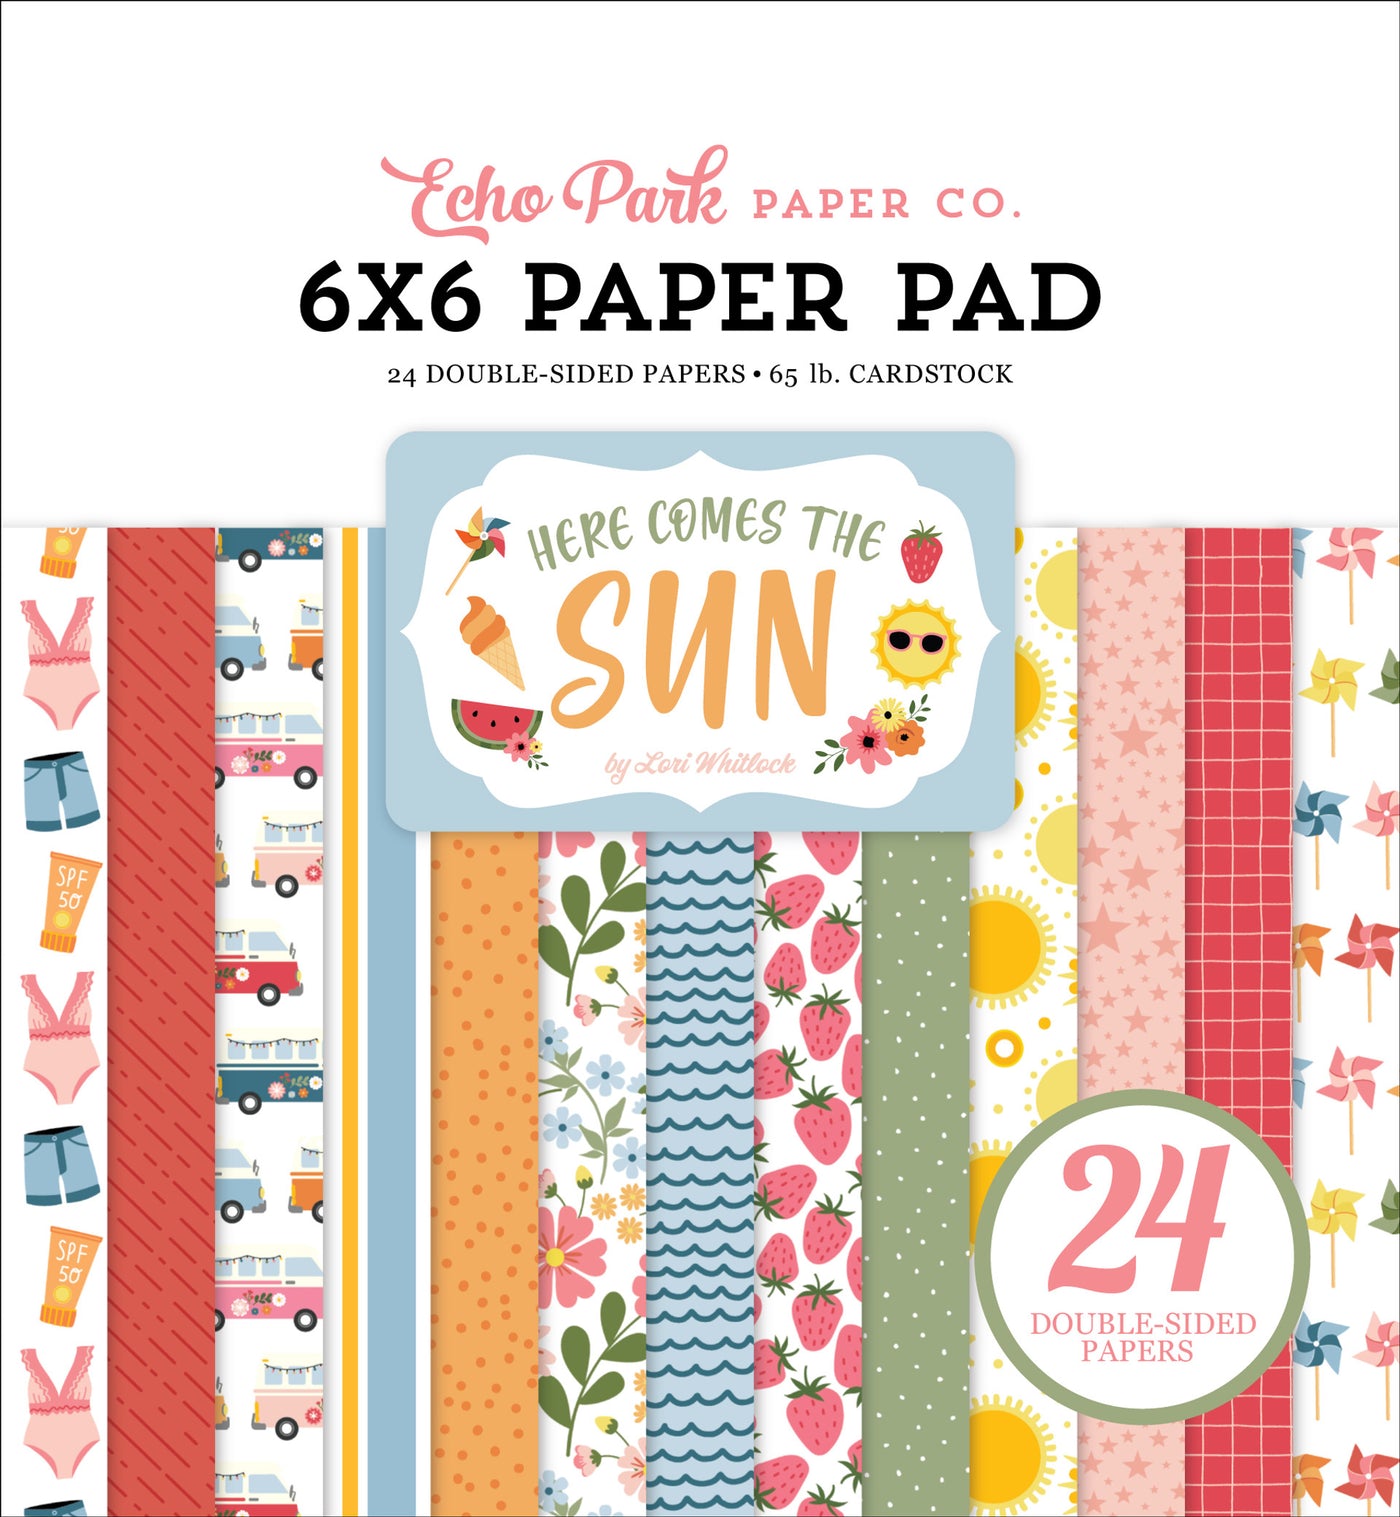 6x6 pad loaded with bright, fun, summer-related graphics and patterns. Fun for cards and papercrafts. Includes 24 double-sided pages.